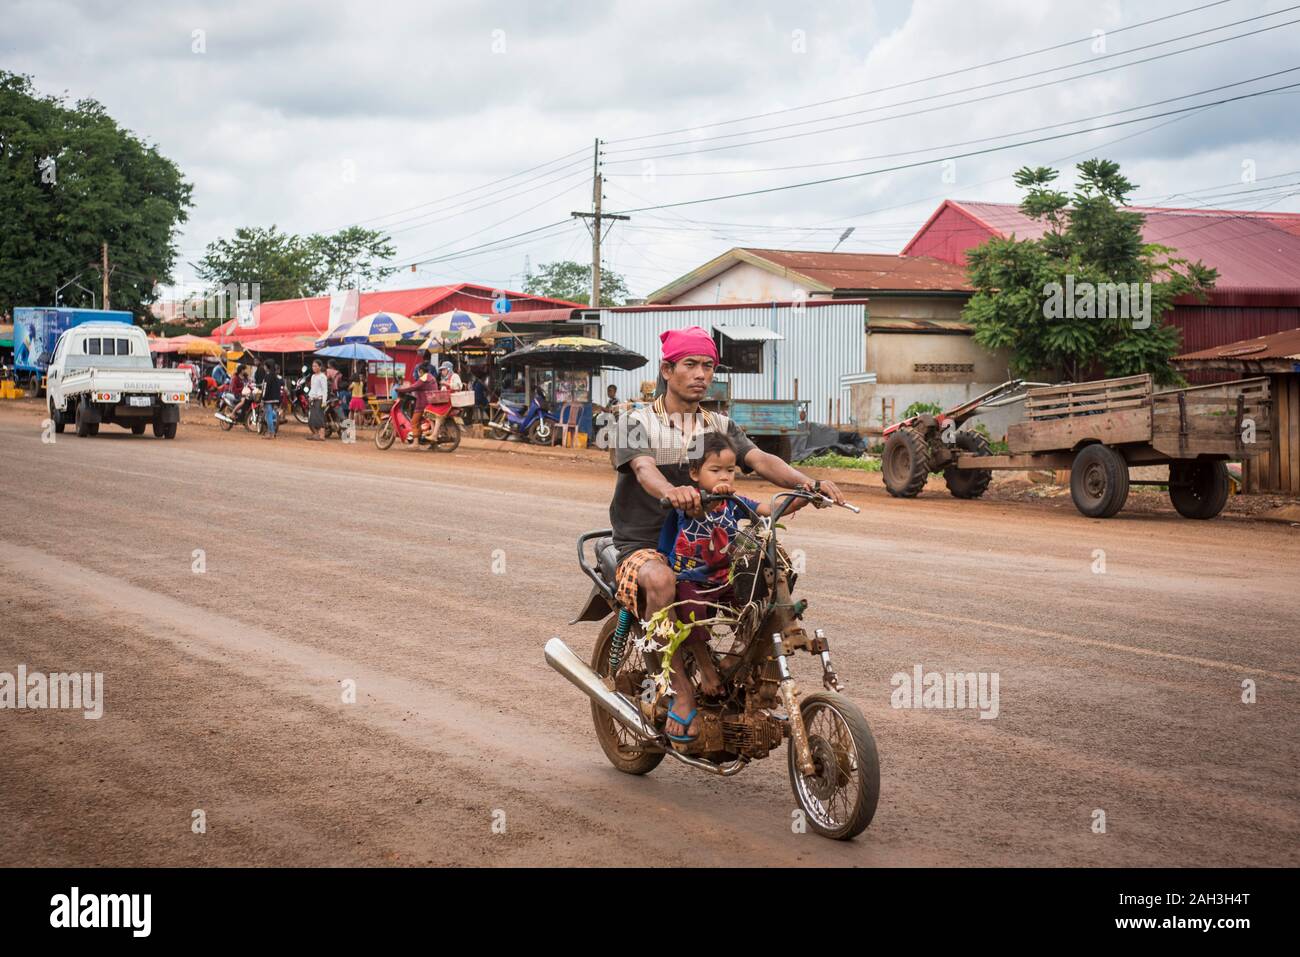 Laongam, Laos, father and son on motorcycle Stock Photo